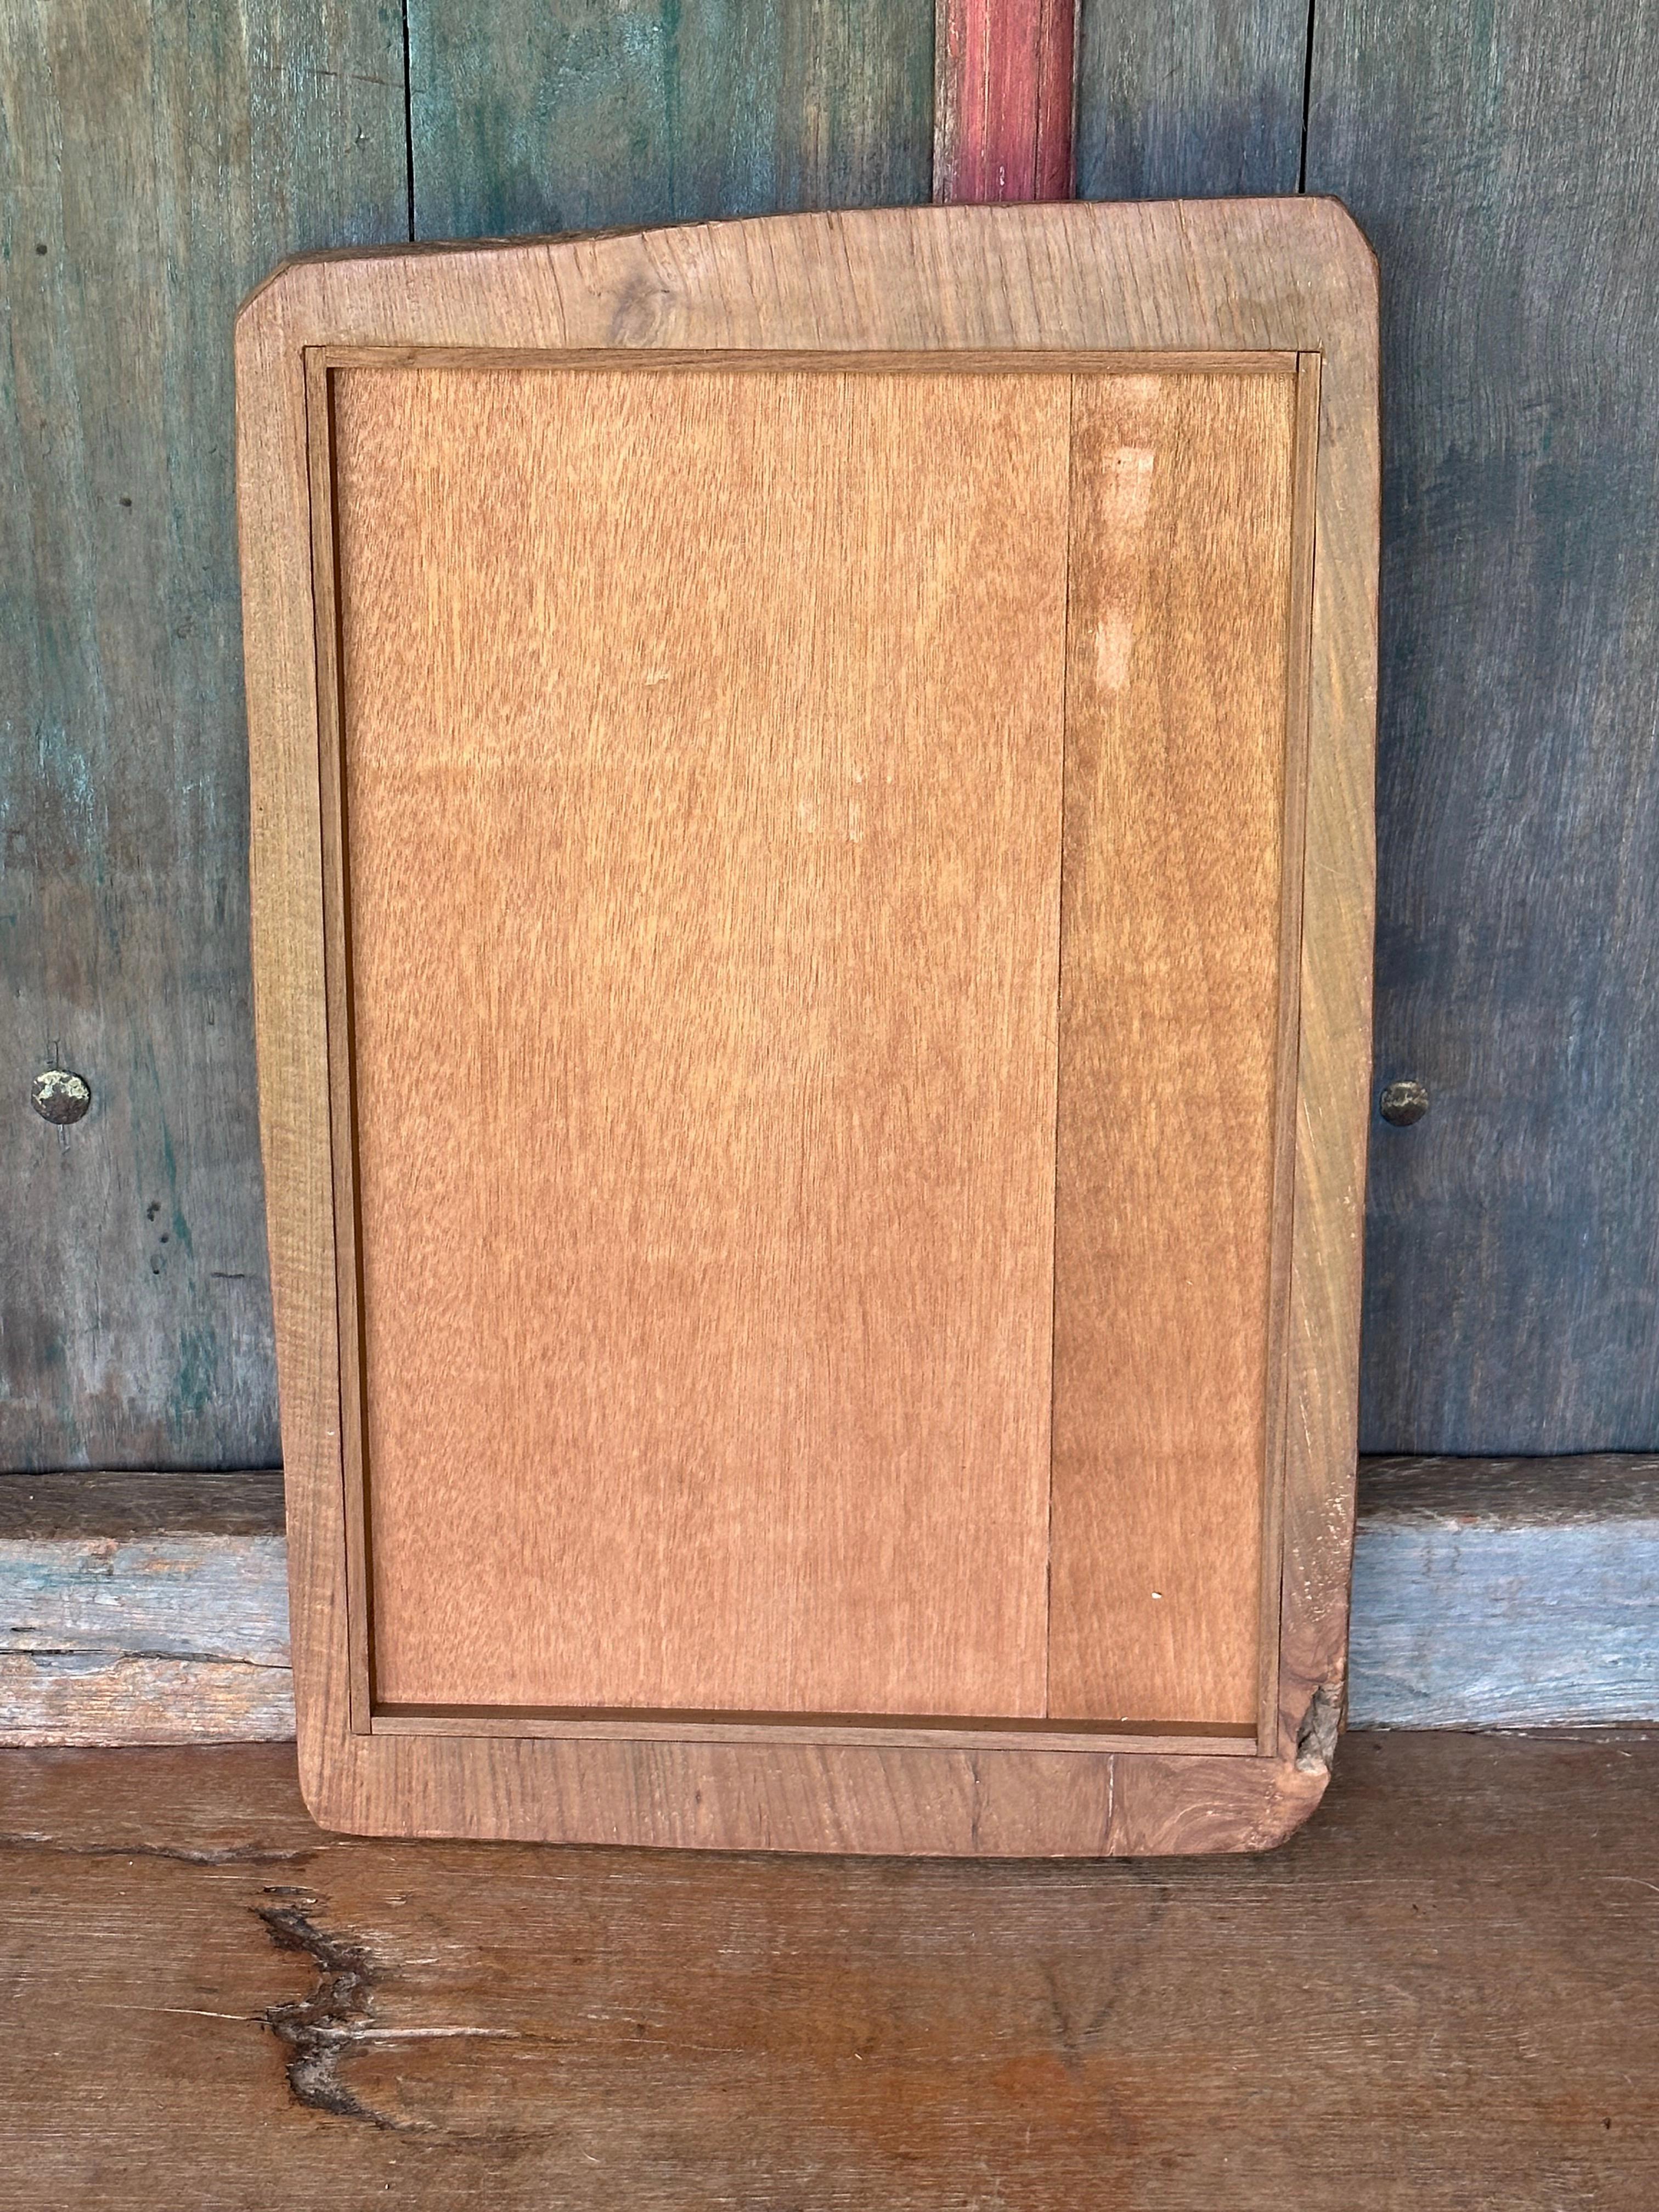 Contemporary Rustic Teak Wood Mirror With Wonderful Age Related Patina & Markings